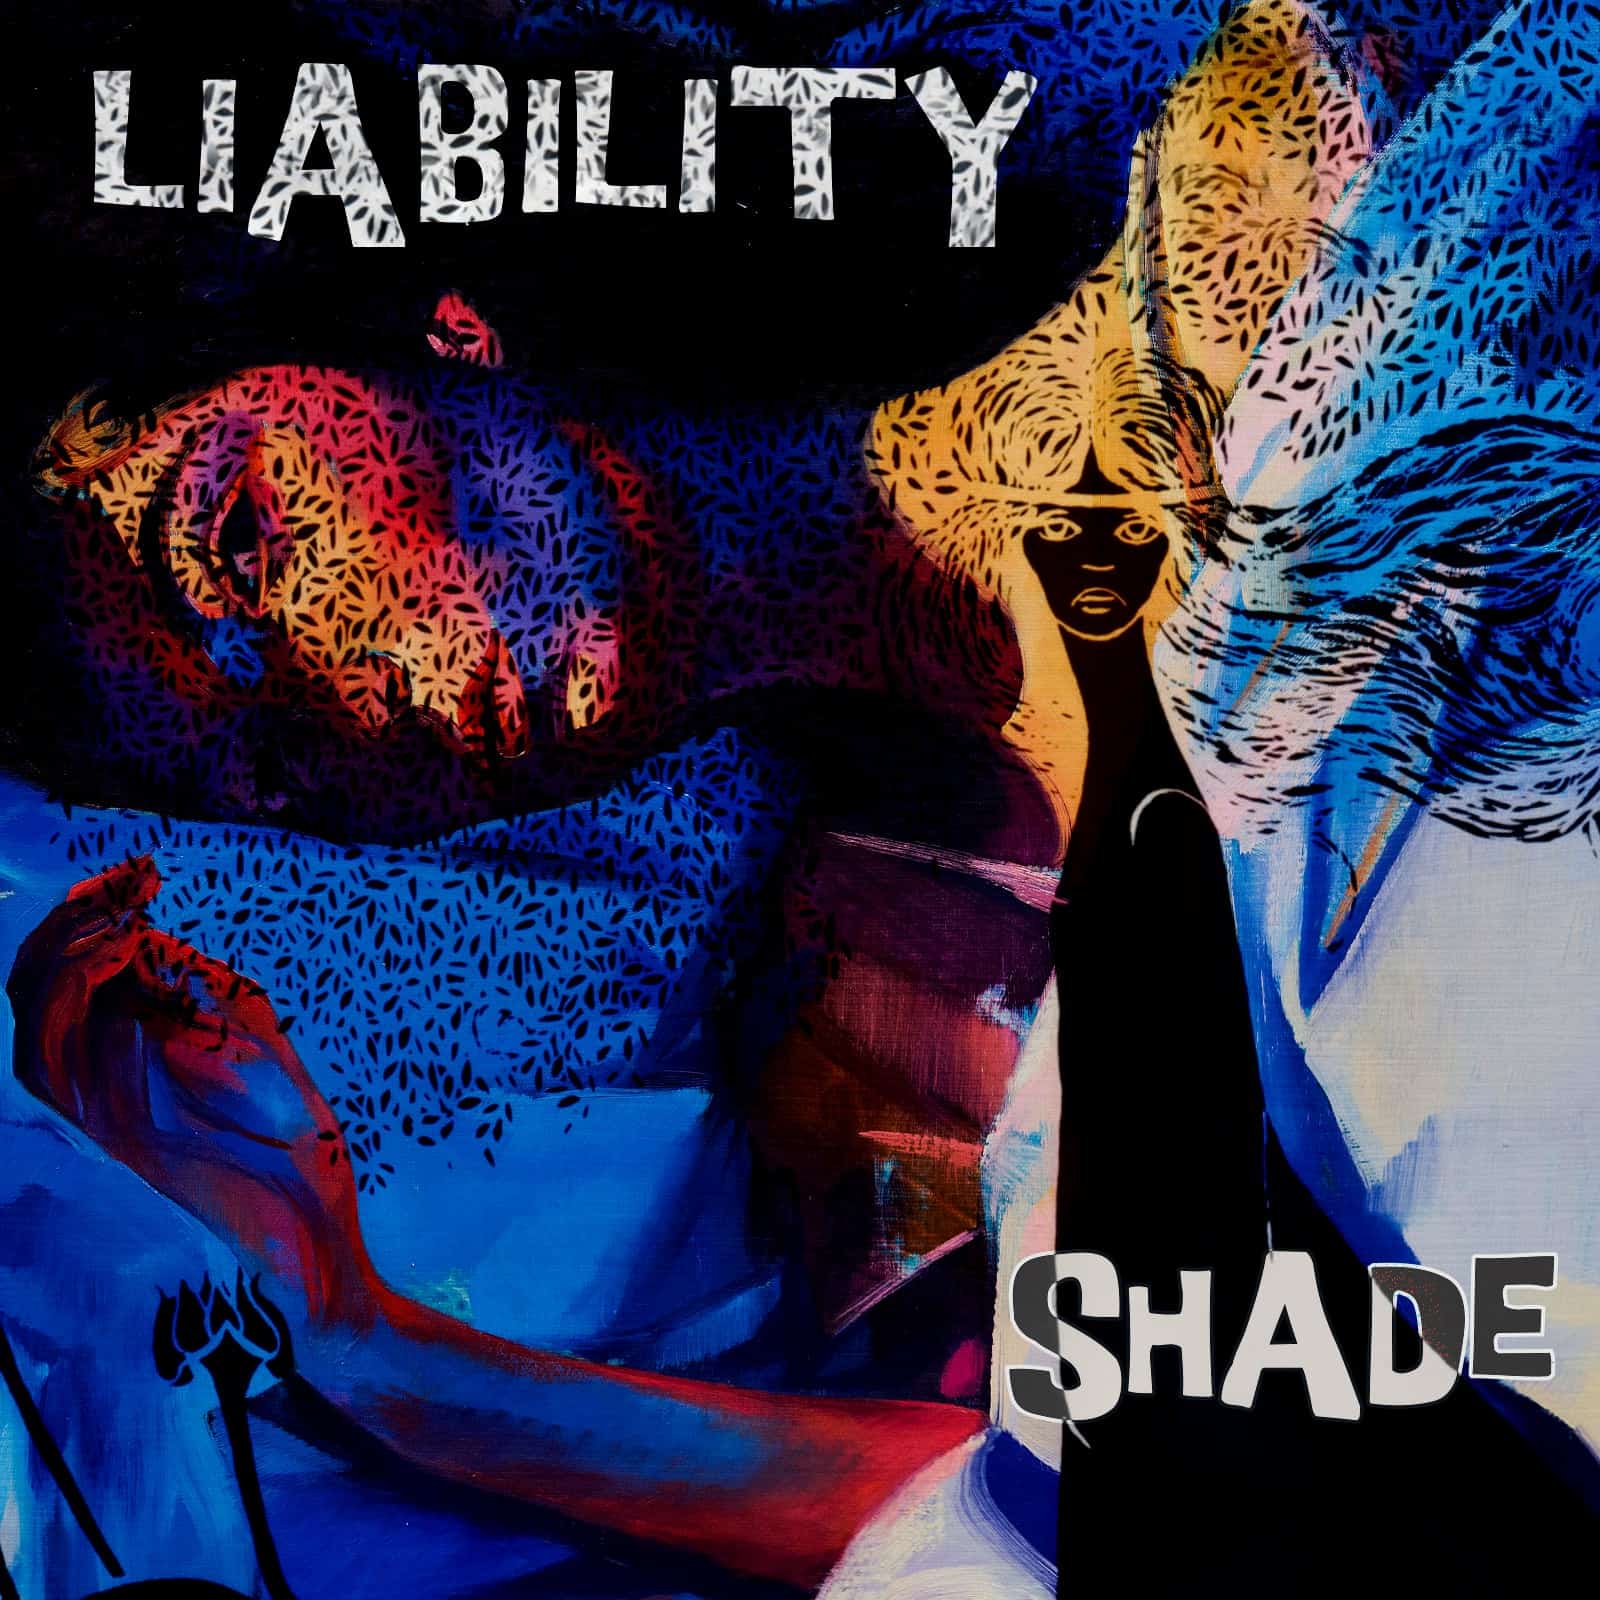 liability shade - Radio Clash Podcast Lorde vs Procol Harum mashup Radio Clash Music Mashup Podcast brings you the best in eclectic tunes, mashups and remixes from around the world. Since 2004, we've been bringing you the freshest and most innovative music from a diverse range of genres and cultures. Join us on our musical journey as we explore the sounds of yesterday, today, and tomorrow. Discover new music and be inspired by the mashup of musical styles that only Radio Clash can provide. Subscribe now to elevate your musical experience!